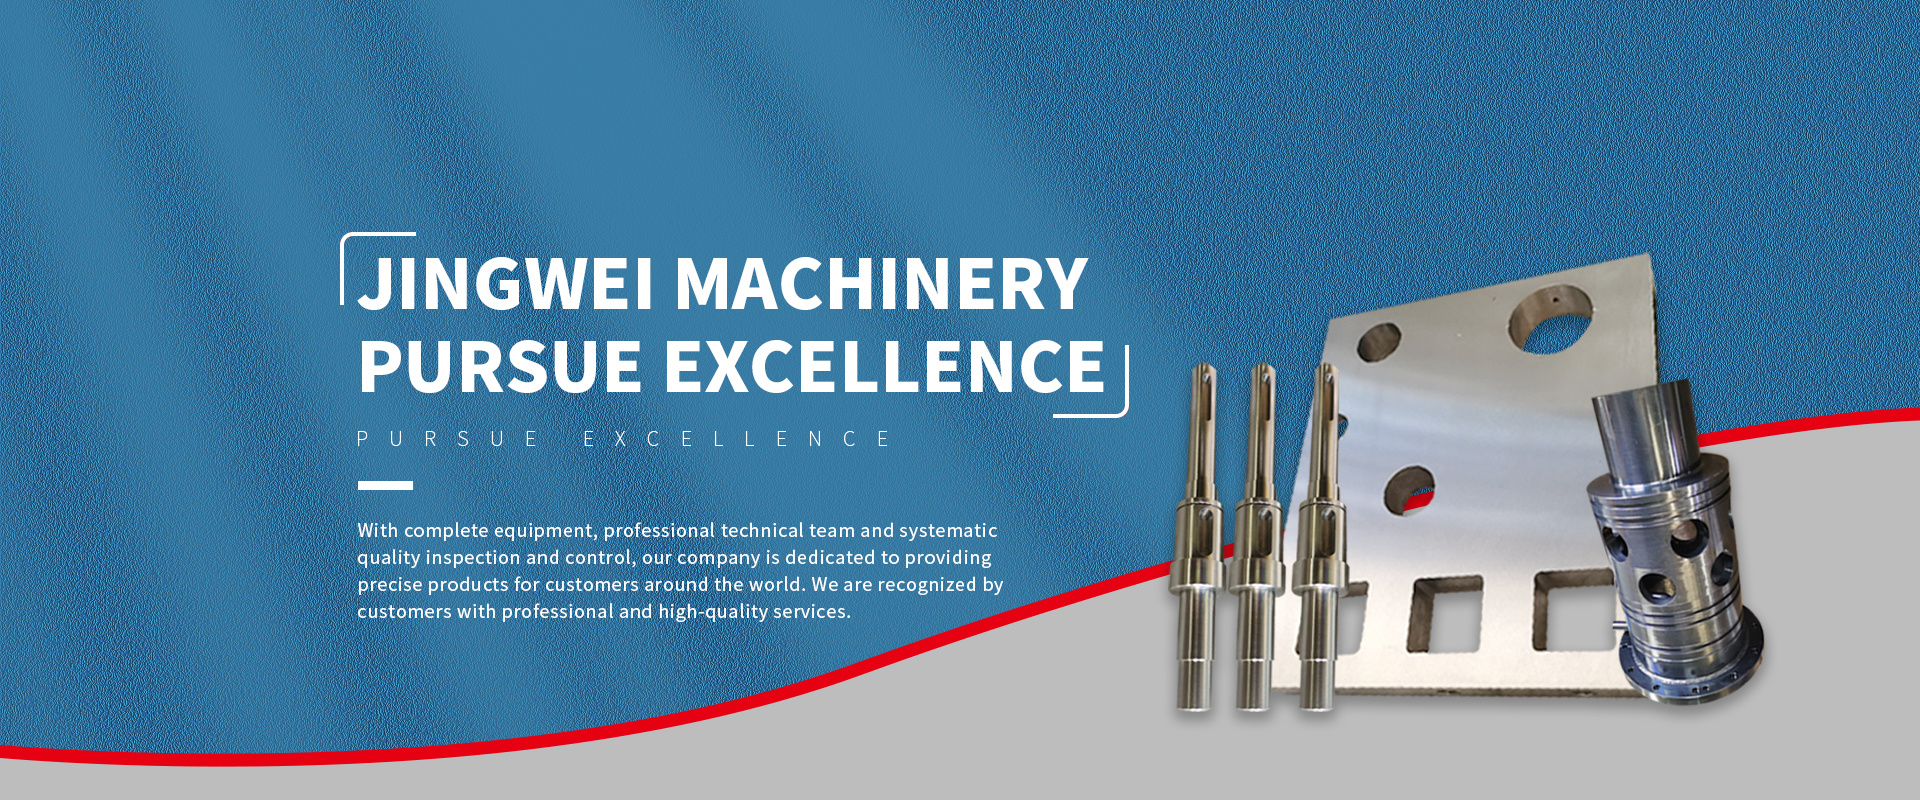 Jingwei Machinery pursues excellence